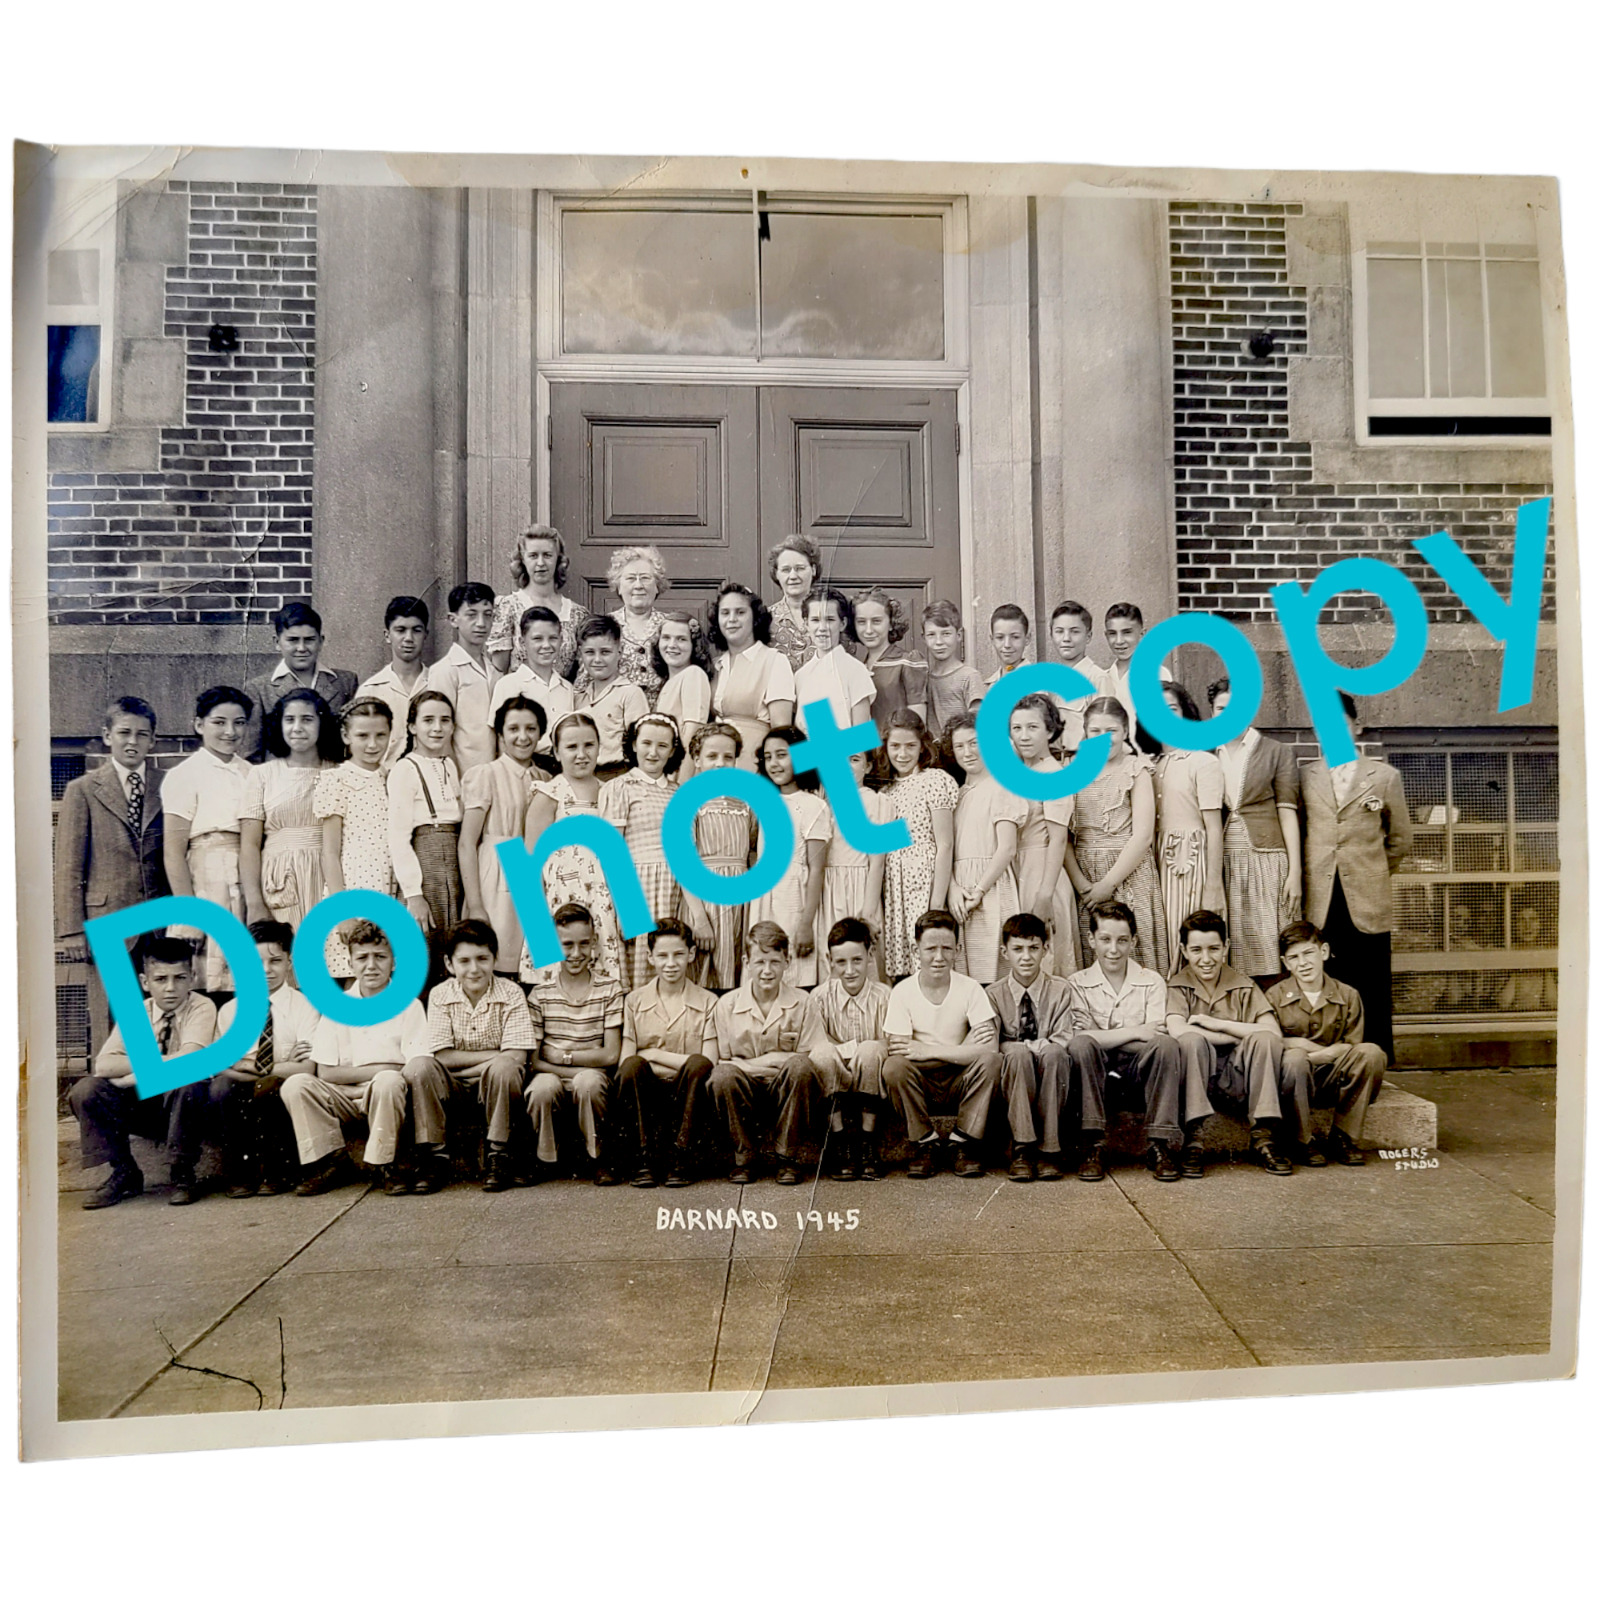 Vintage 1945 Barnard Elementary School NEW HAVEN CT Photo Connecticut WWII 1940s